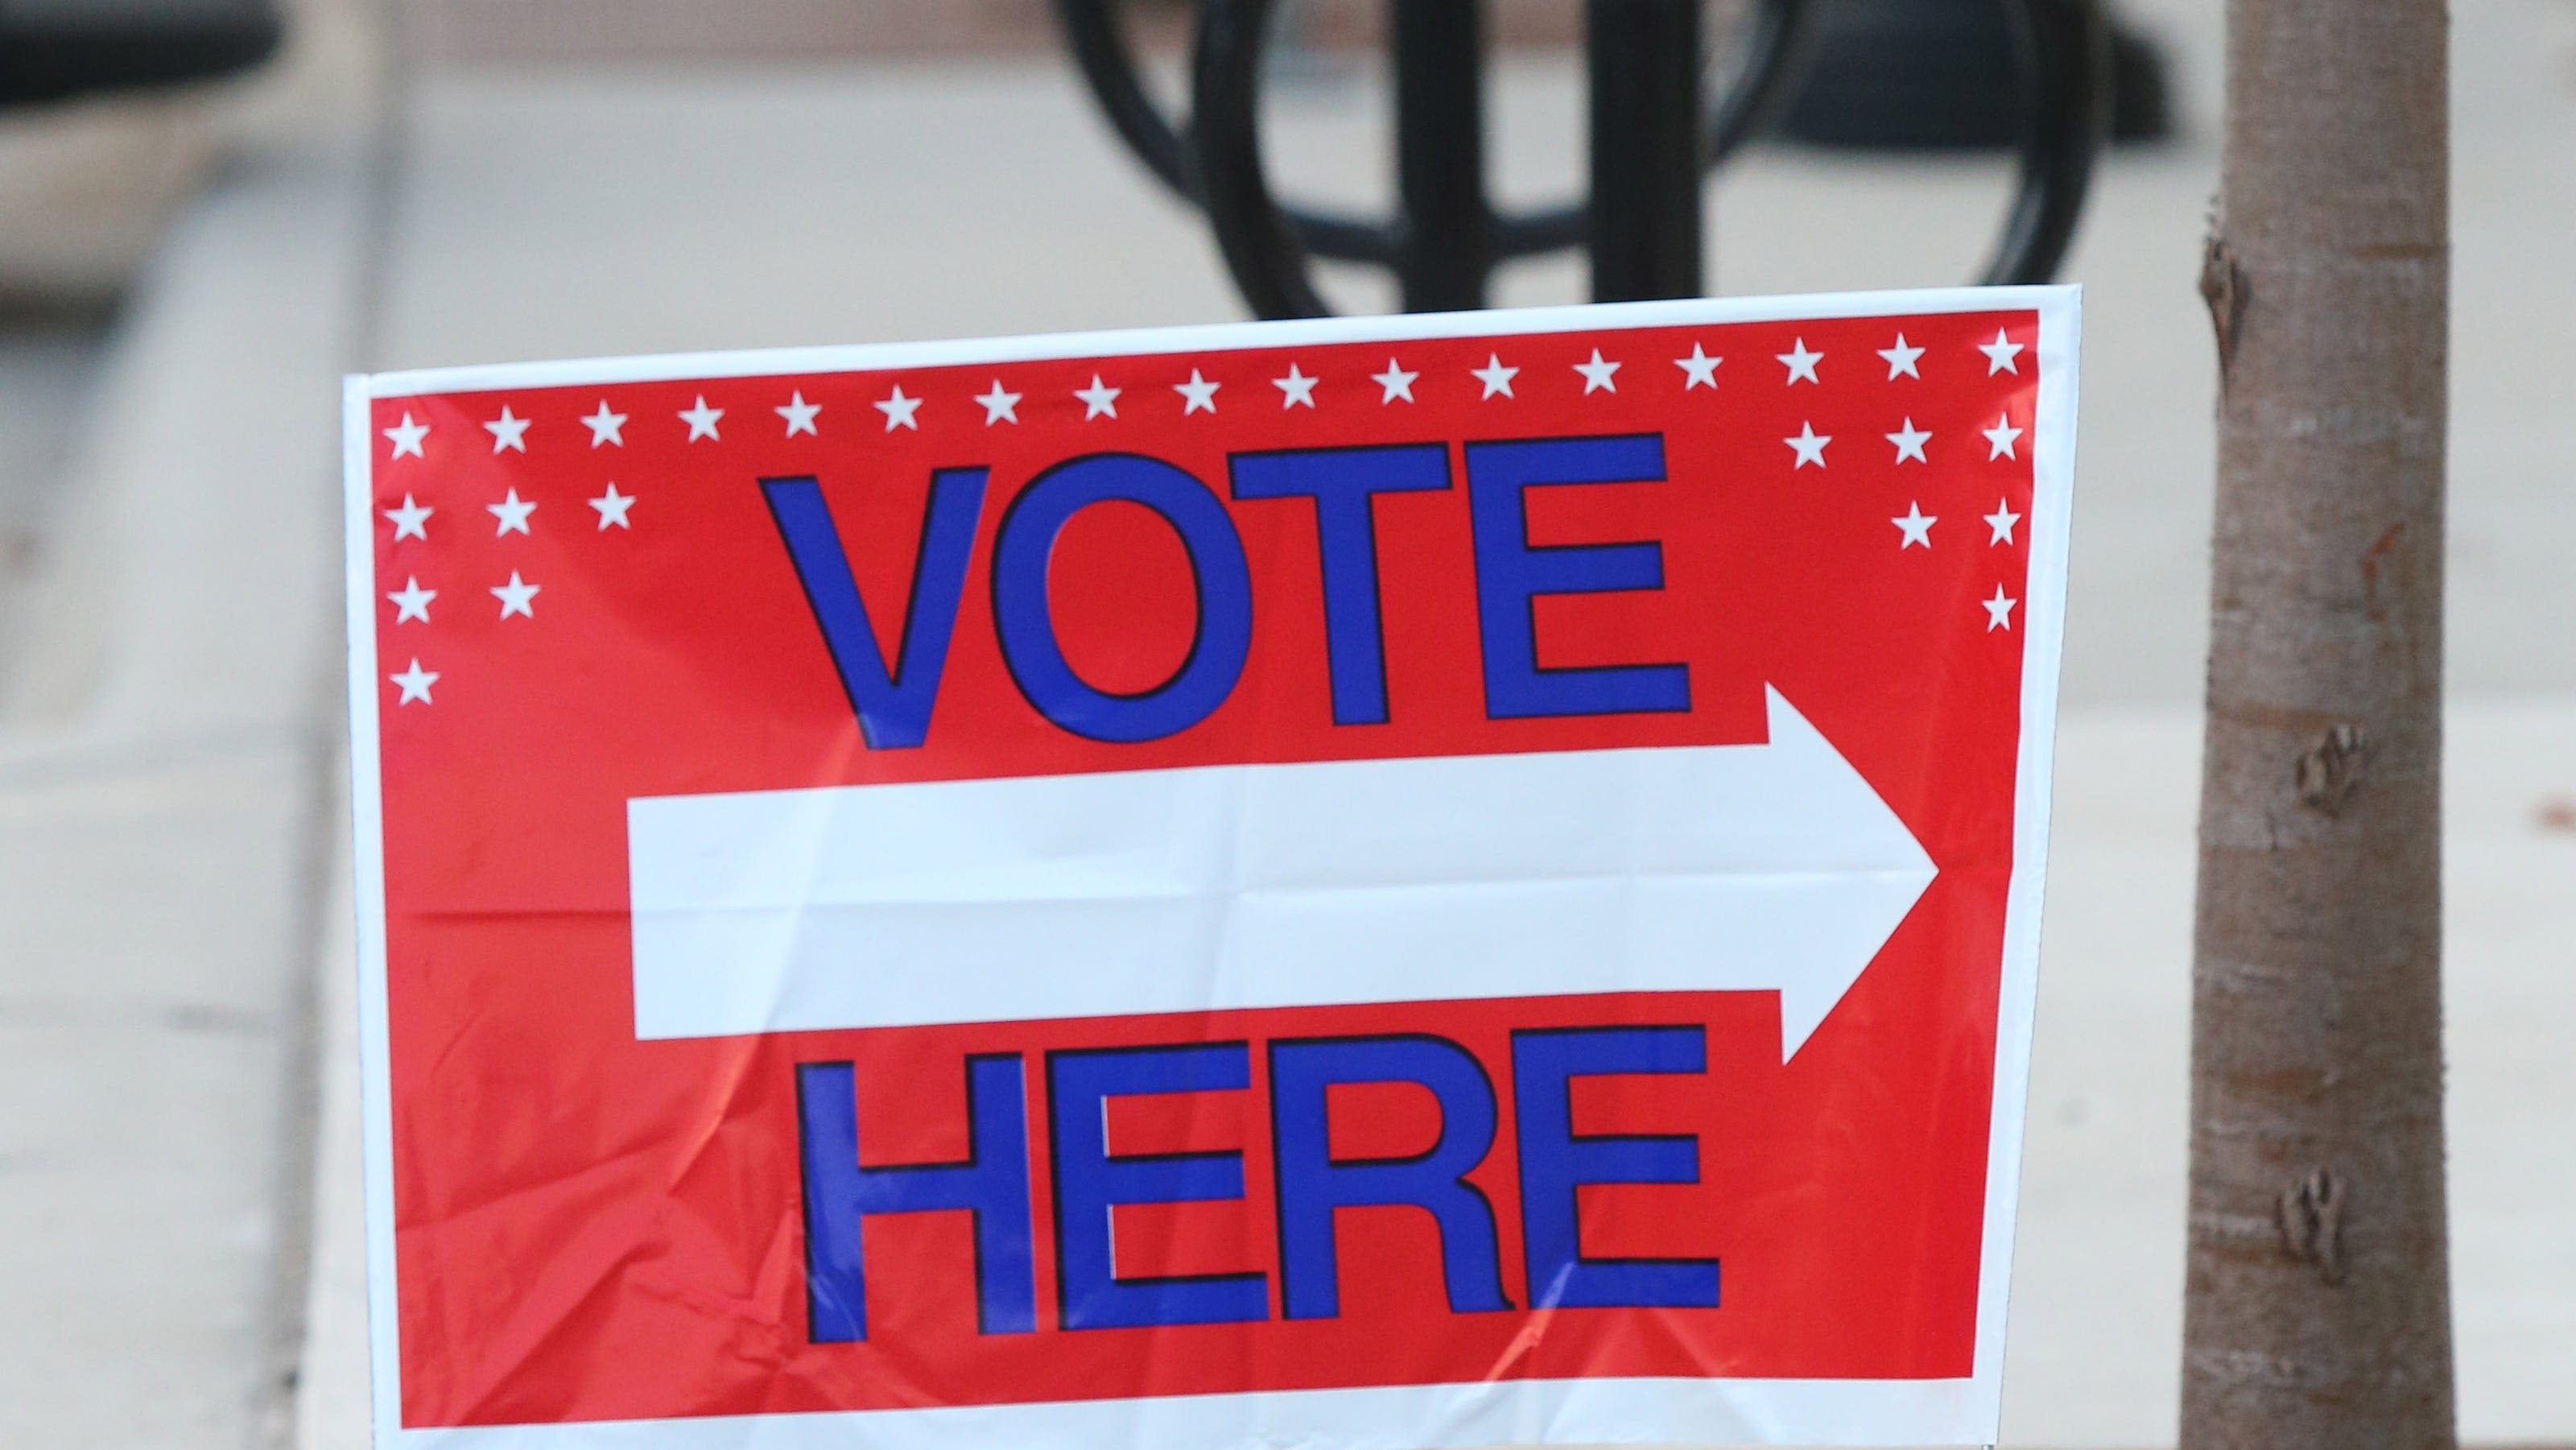 St. Joseph County primary election results